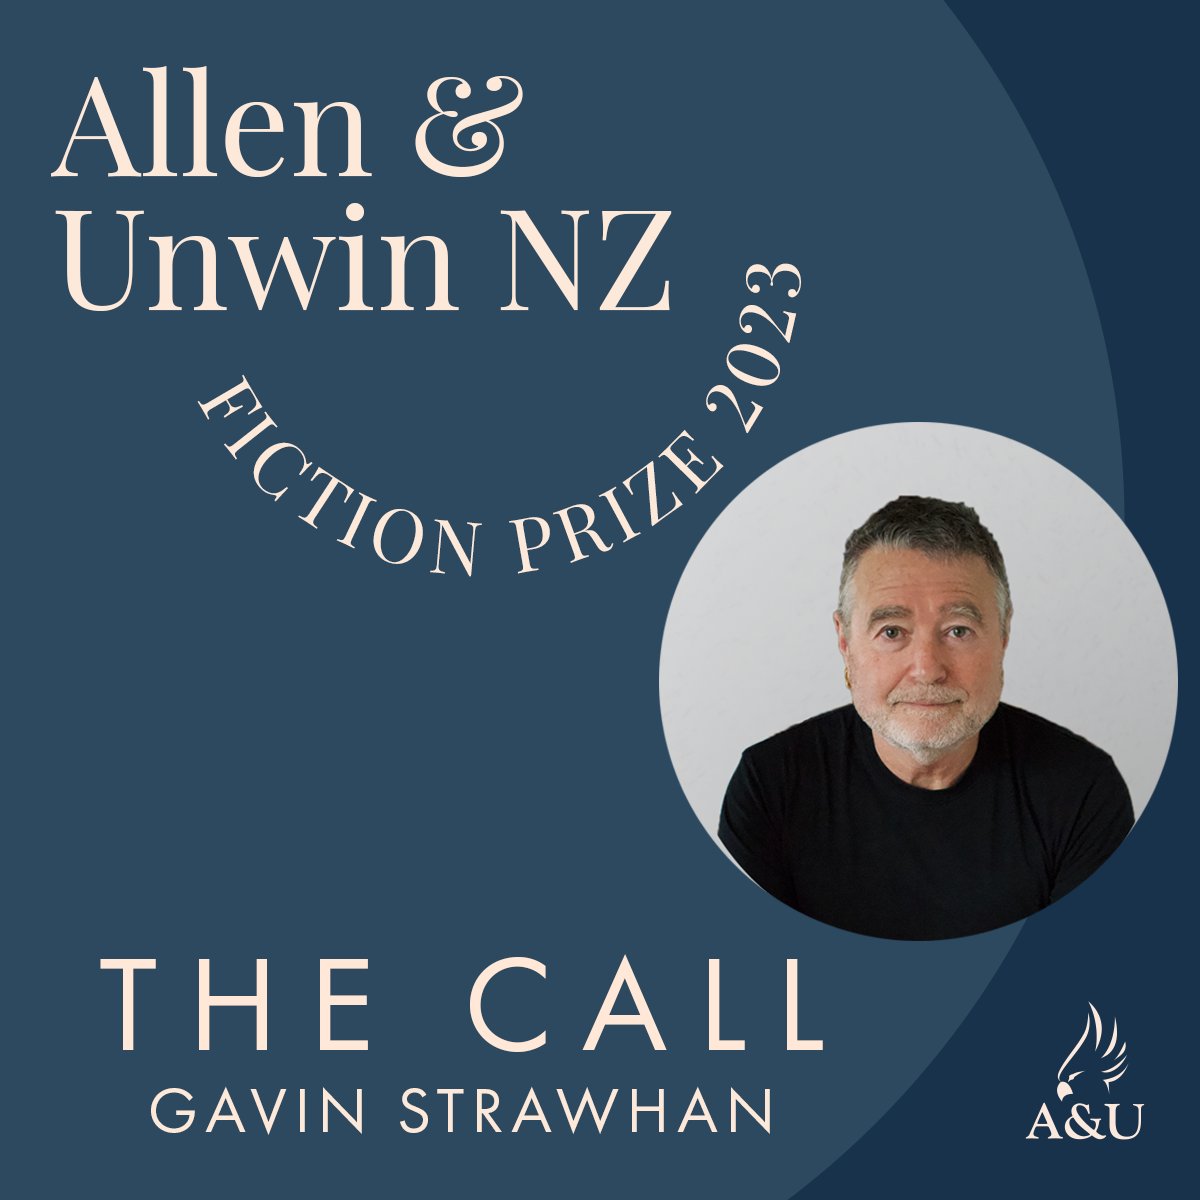 📣We are delighted to announce that the winner of our 2023 Fiction Prize is Auckland TV writer, show runner and EP, Gavin Strawhan. His entry, The Call, is a taut, superbly plotted crime novel – set in rural coastal New Zealand. The Call will be published next year.